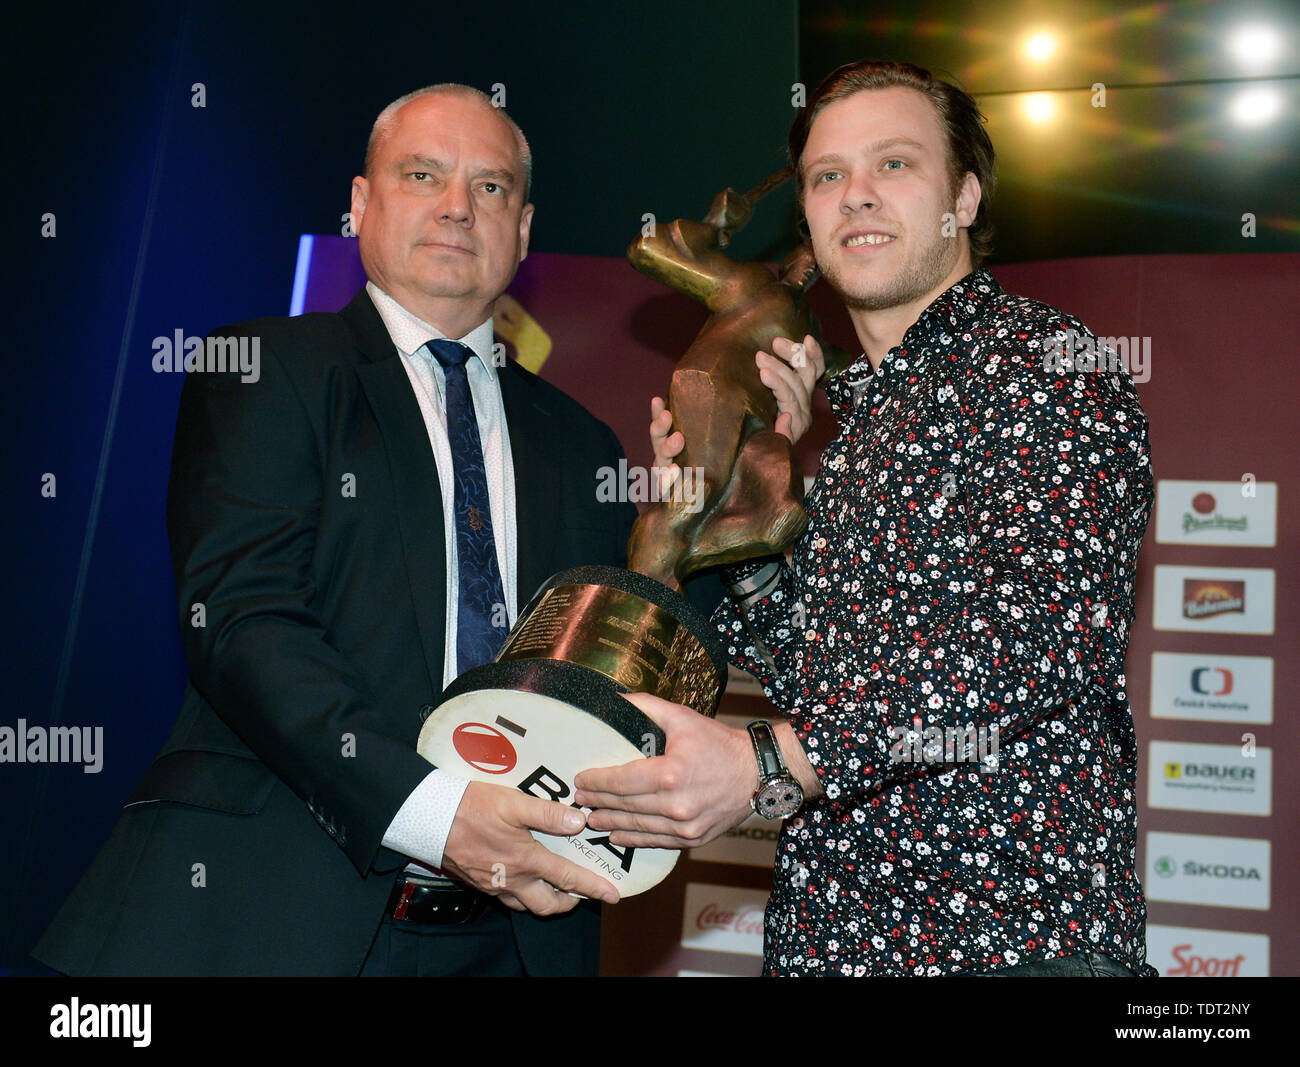 Prague, Czech Republic. 17th June, 2019. Forward David Pastrnak, 23, who  plays the NHL with Boston Bruins, won the Golden Stick award for the best  Czech ice-hockey player of the past season